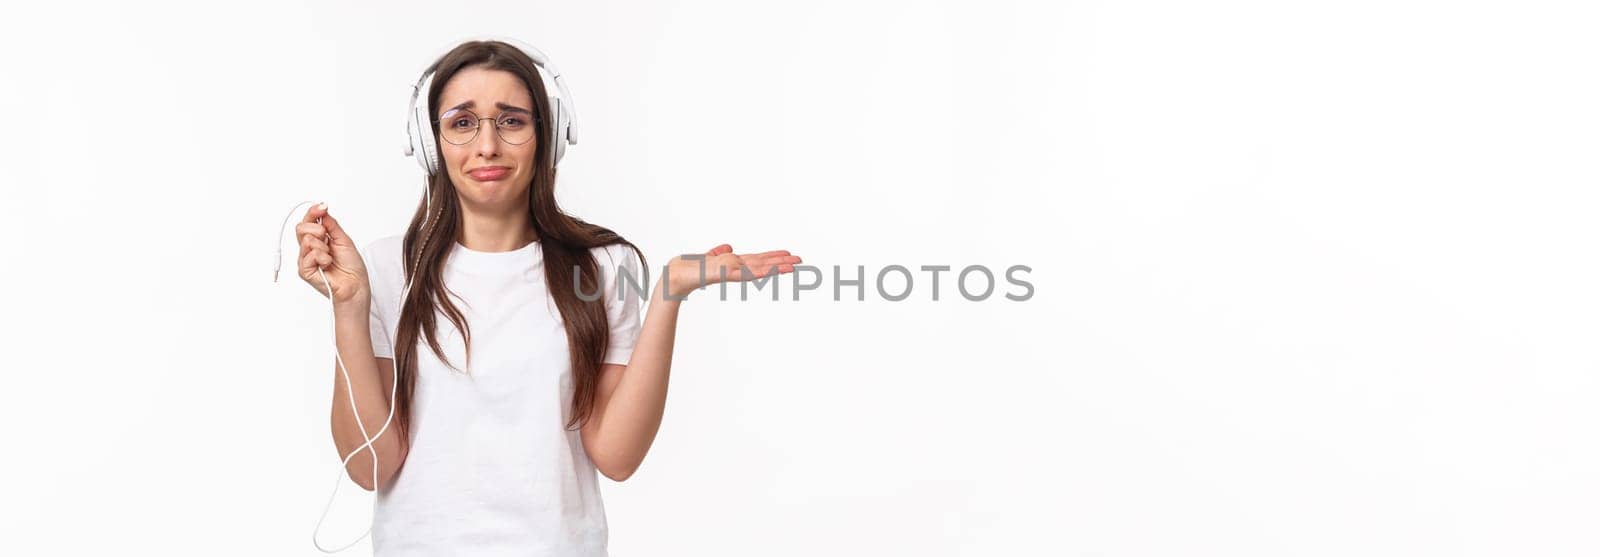 Technology, lifestyle and music concept. Portrait of awkward and frustrated young gloomy girl in headphones, holding wire and shrugging upset, earphones broke, want buy wireless earbuds.